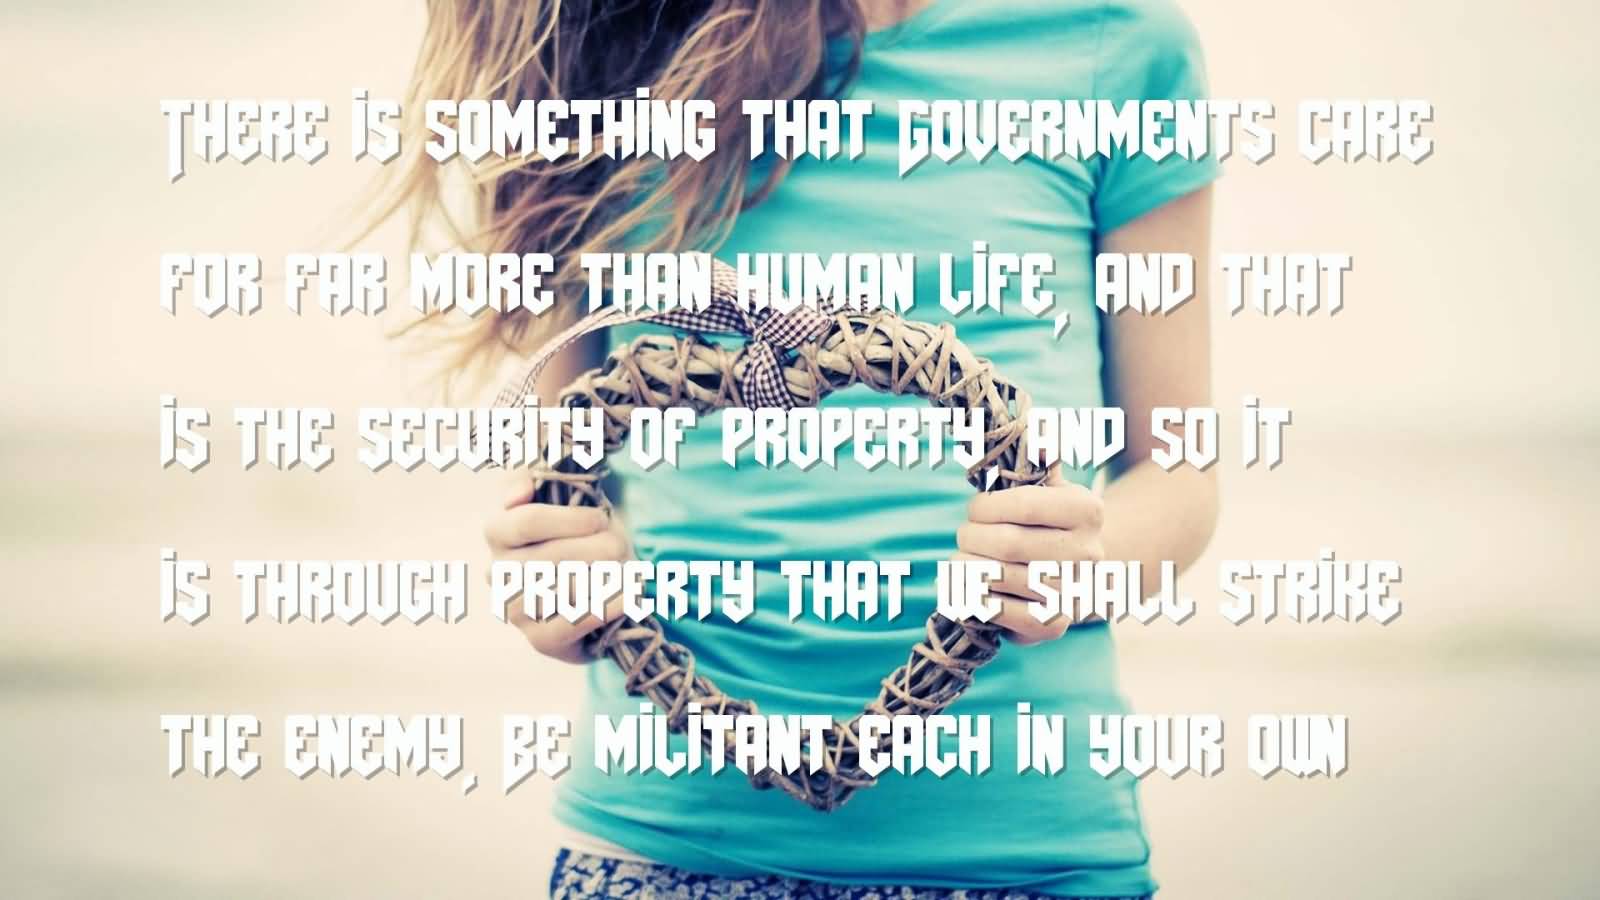 There is something that Governments care for far more than human life, and that is the security of property, and so it is through property that we shall strike the enemy. Be militant each in your own way.